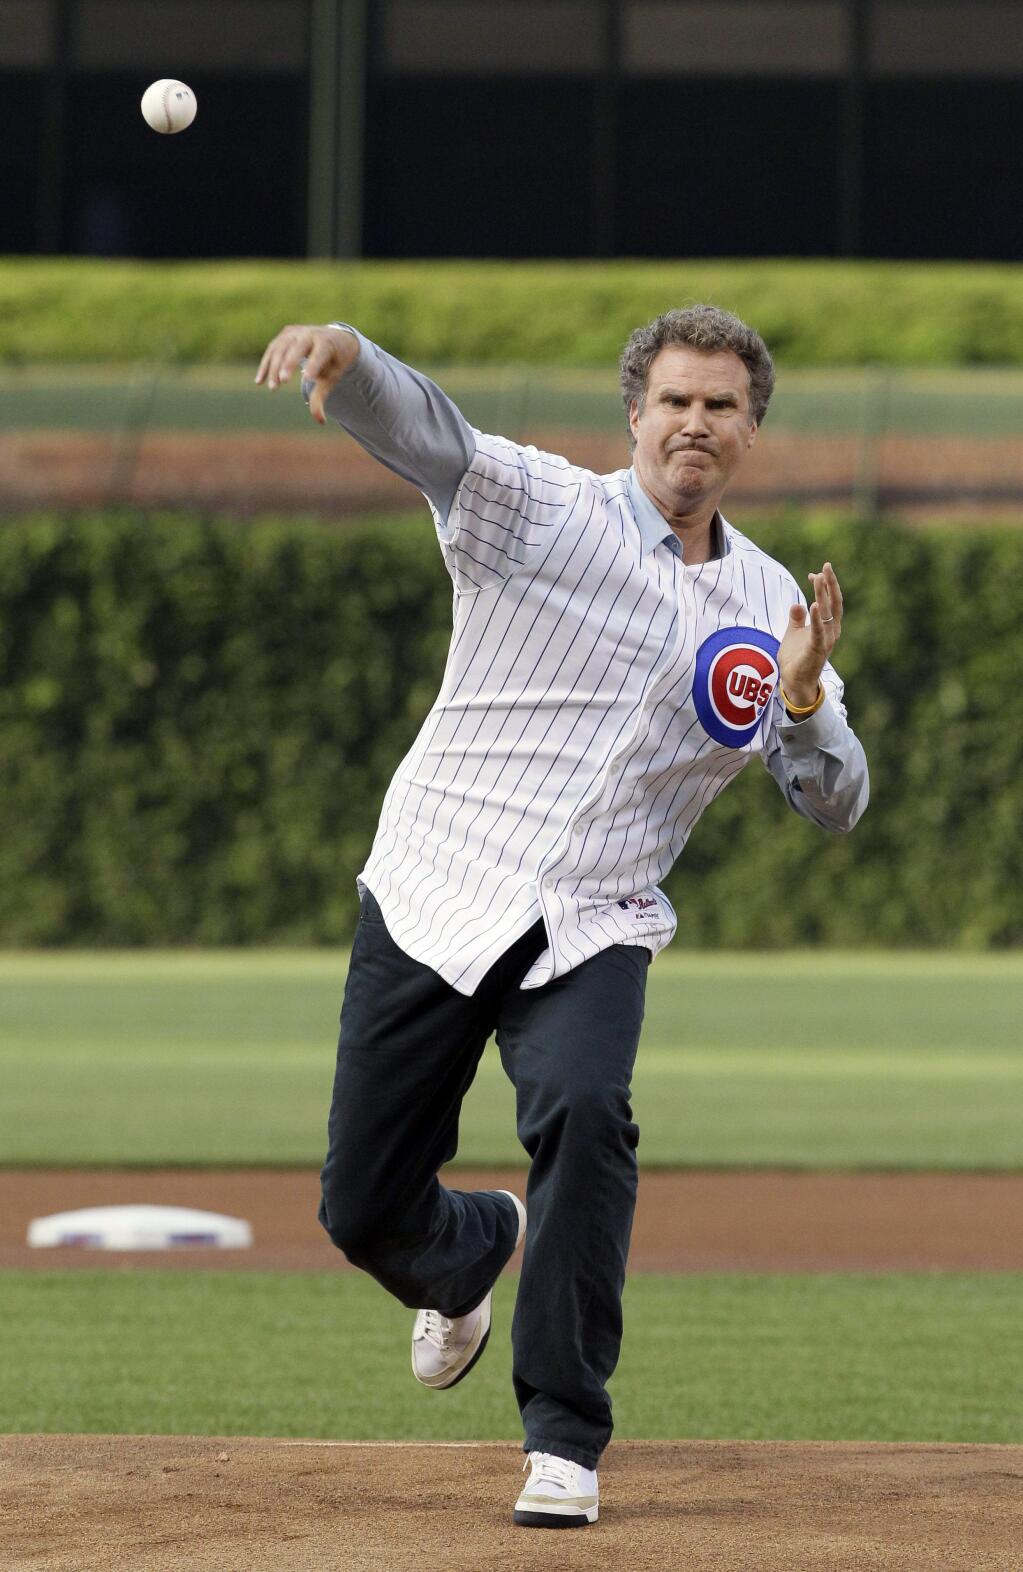 FILE - In this July 18, 2012, file photo, comedian Will Ferrell throws out the ceremonial first pitch before a baseball game between the Miami Marlins and the Chicago Cubs in Chicago. Ferrell will appear in at least two Arizona spring training games on Thursday, March 12, 2015. The Chicago White Sox confirmed the star of 'Anchorman' and many other movies will appear in their game against the San Francisco Giants in Glendale and the San Diego Padres say he will play in their game against the Los Angeles Dodgers in Peoria. (AP Photo/Nam Y. Huh, File)